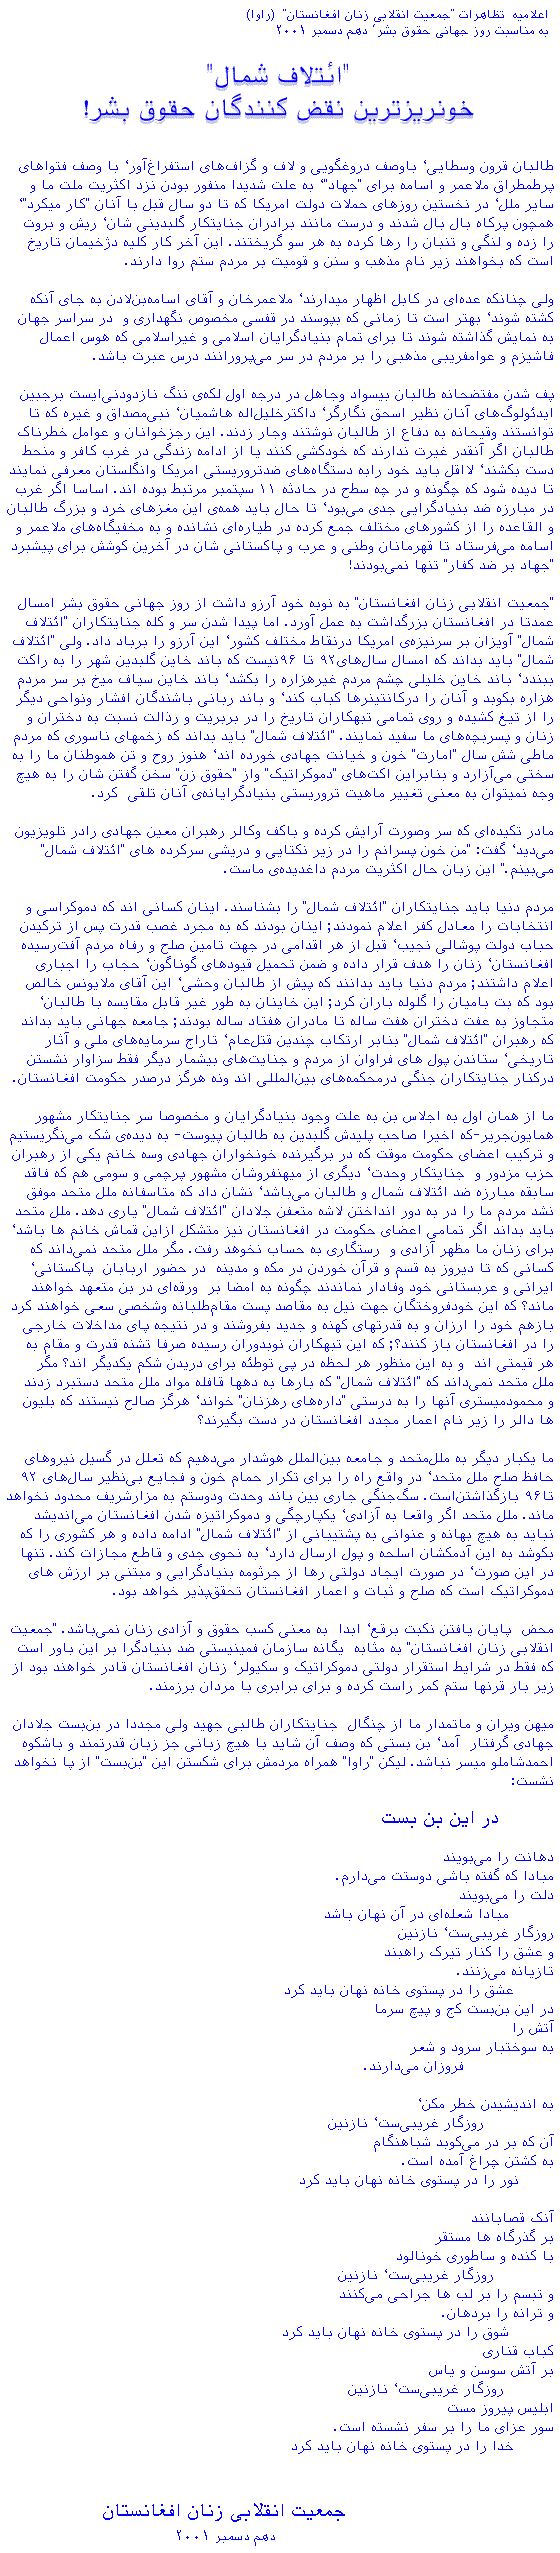 Declaration of RAWA on the occasion of International Human Rights Day, December 10, 2001 (Farsi)            GIF Graphic file             Loading.... 